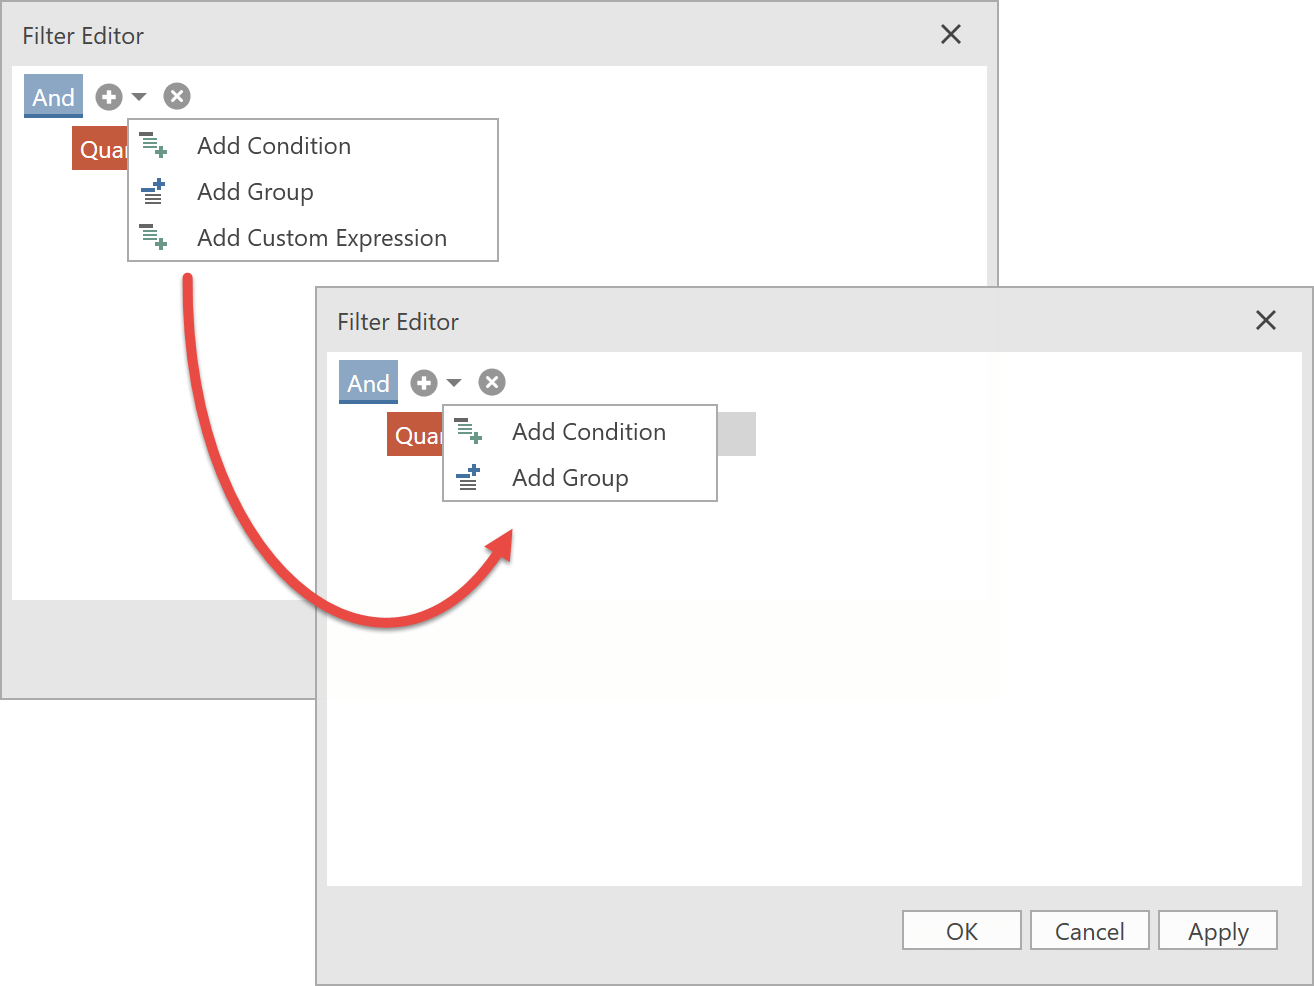 Prohibit Group Operations - WPF Filter Editor, DevExpress